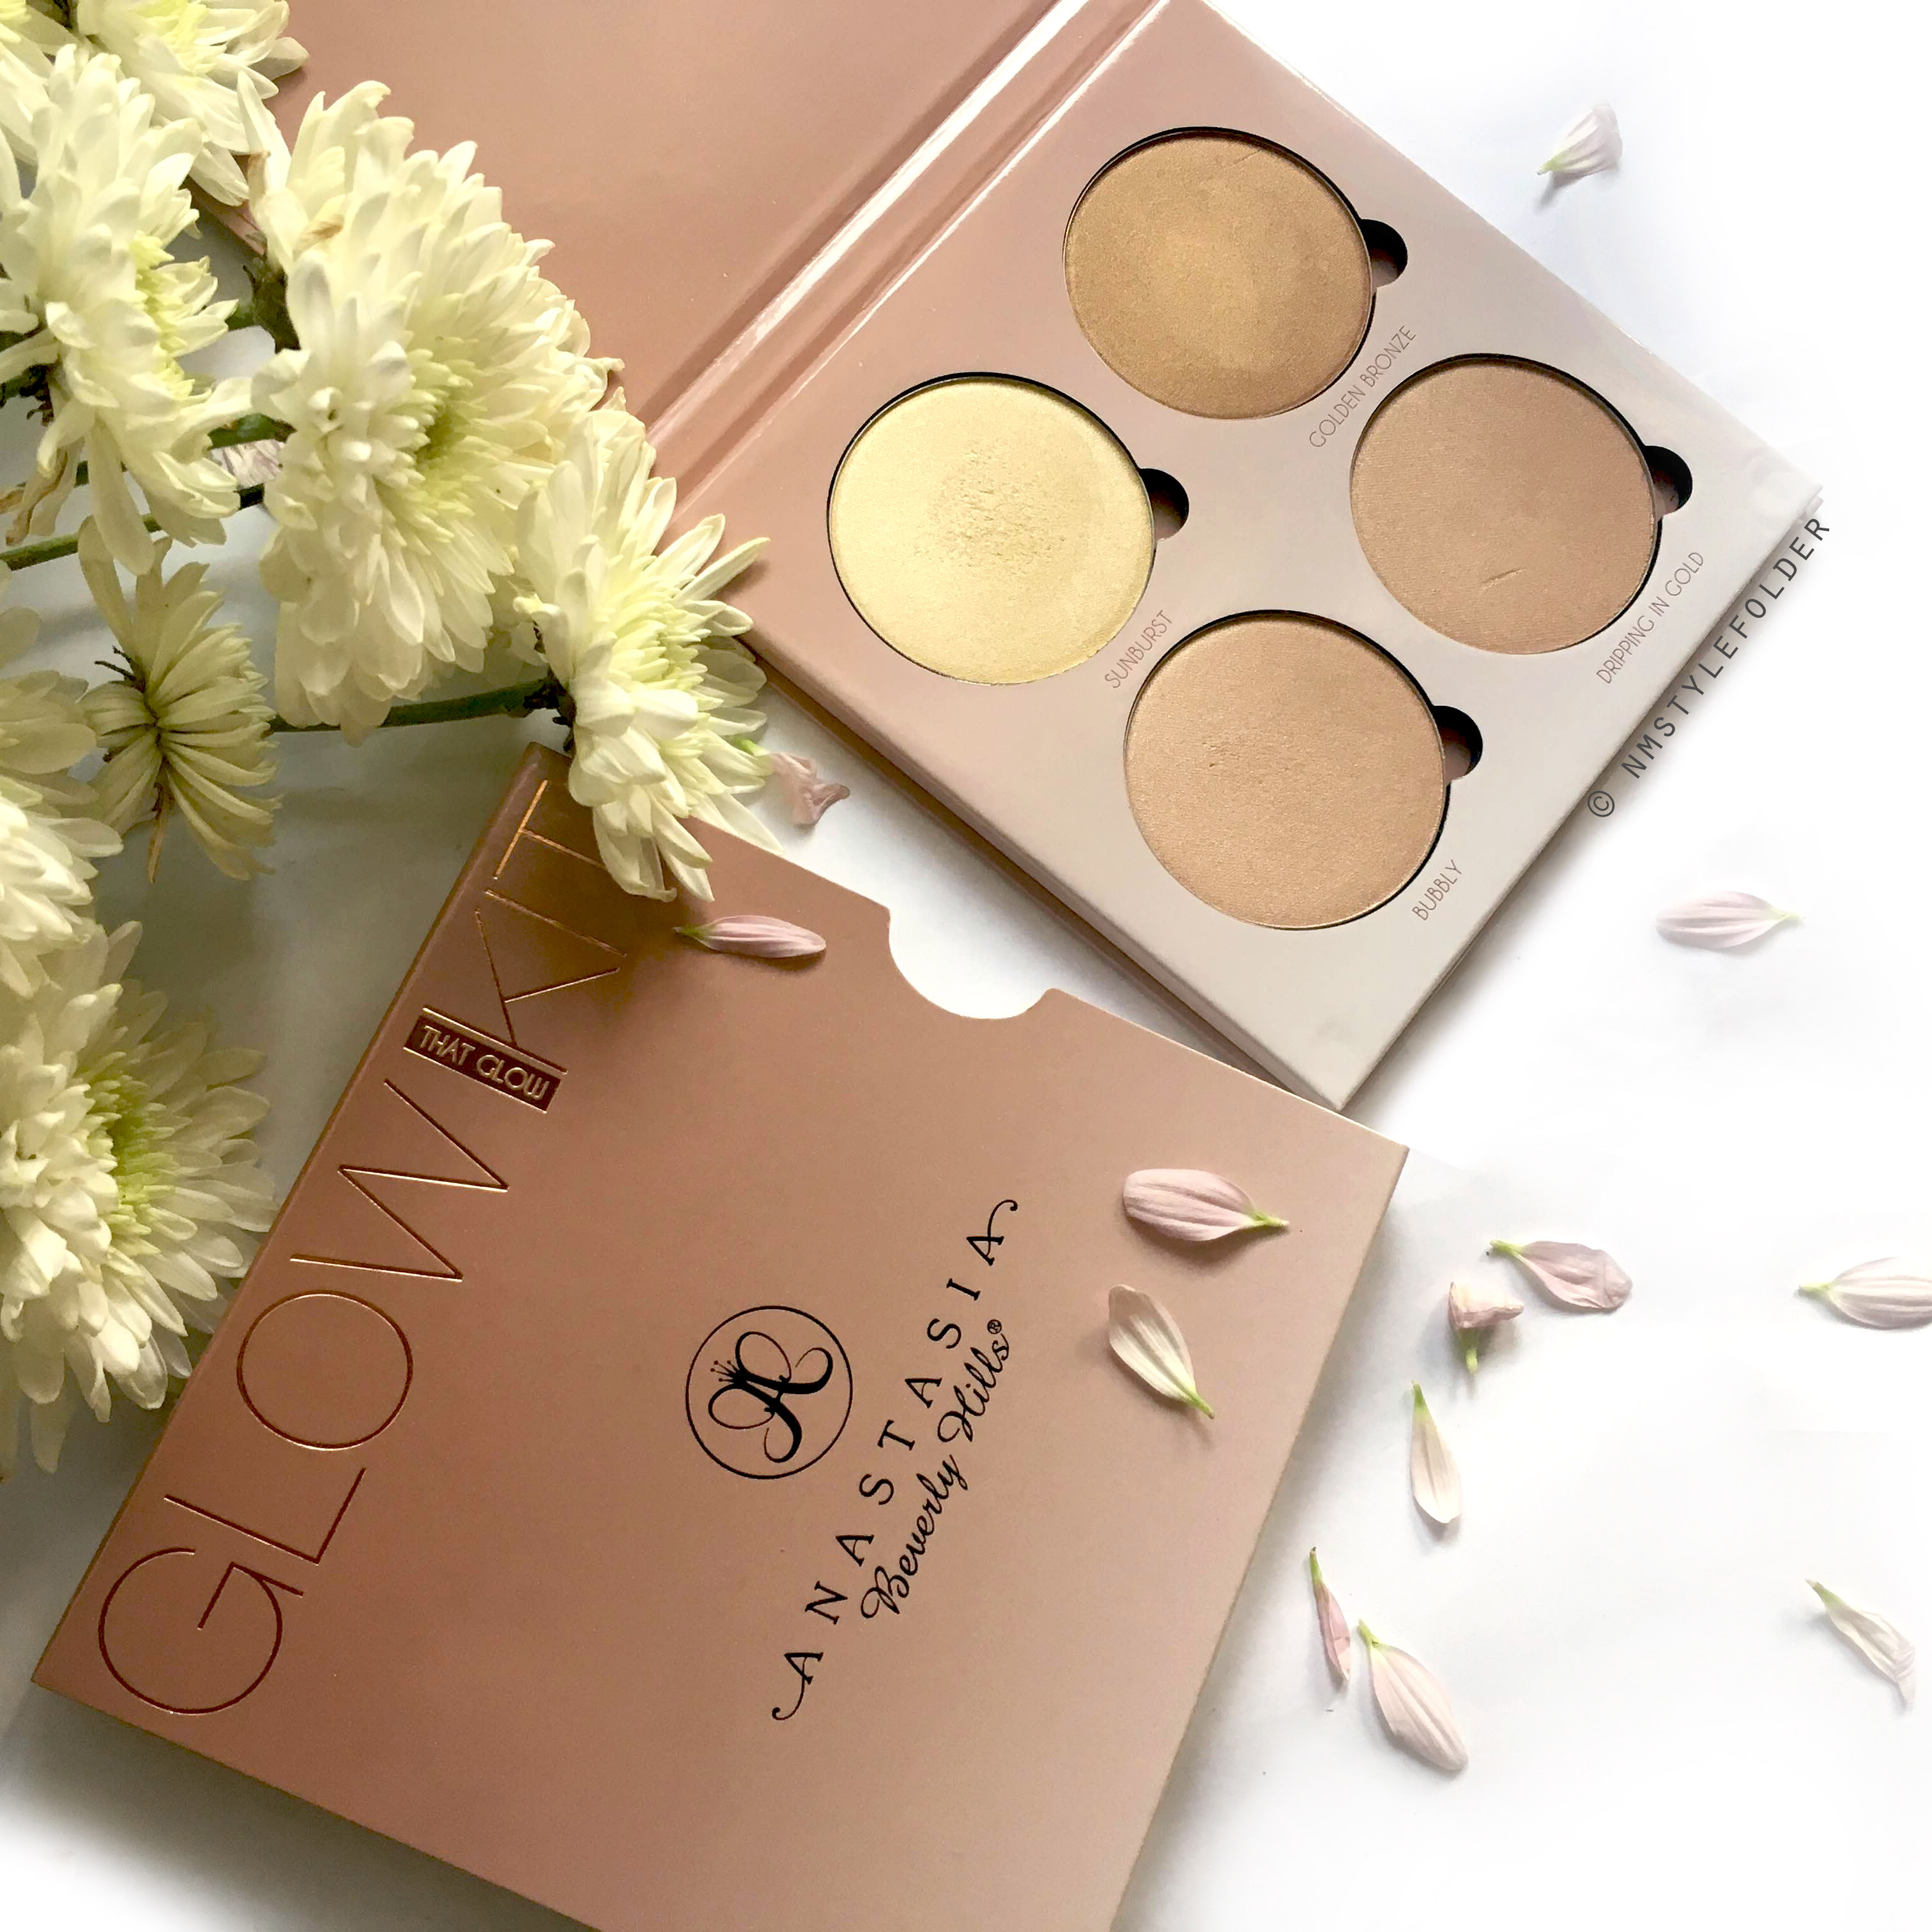 Anastasia Beverly Hills That Glow Kit review – Style Folder